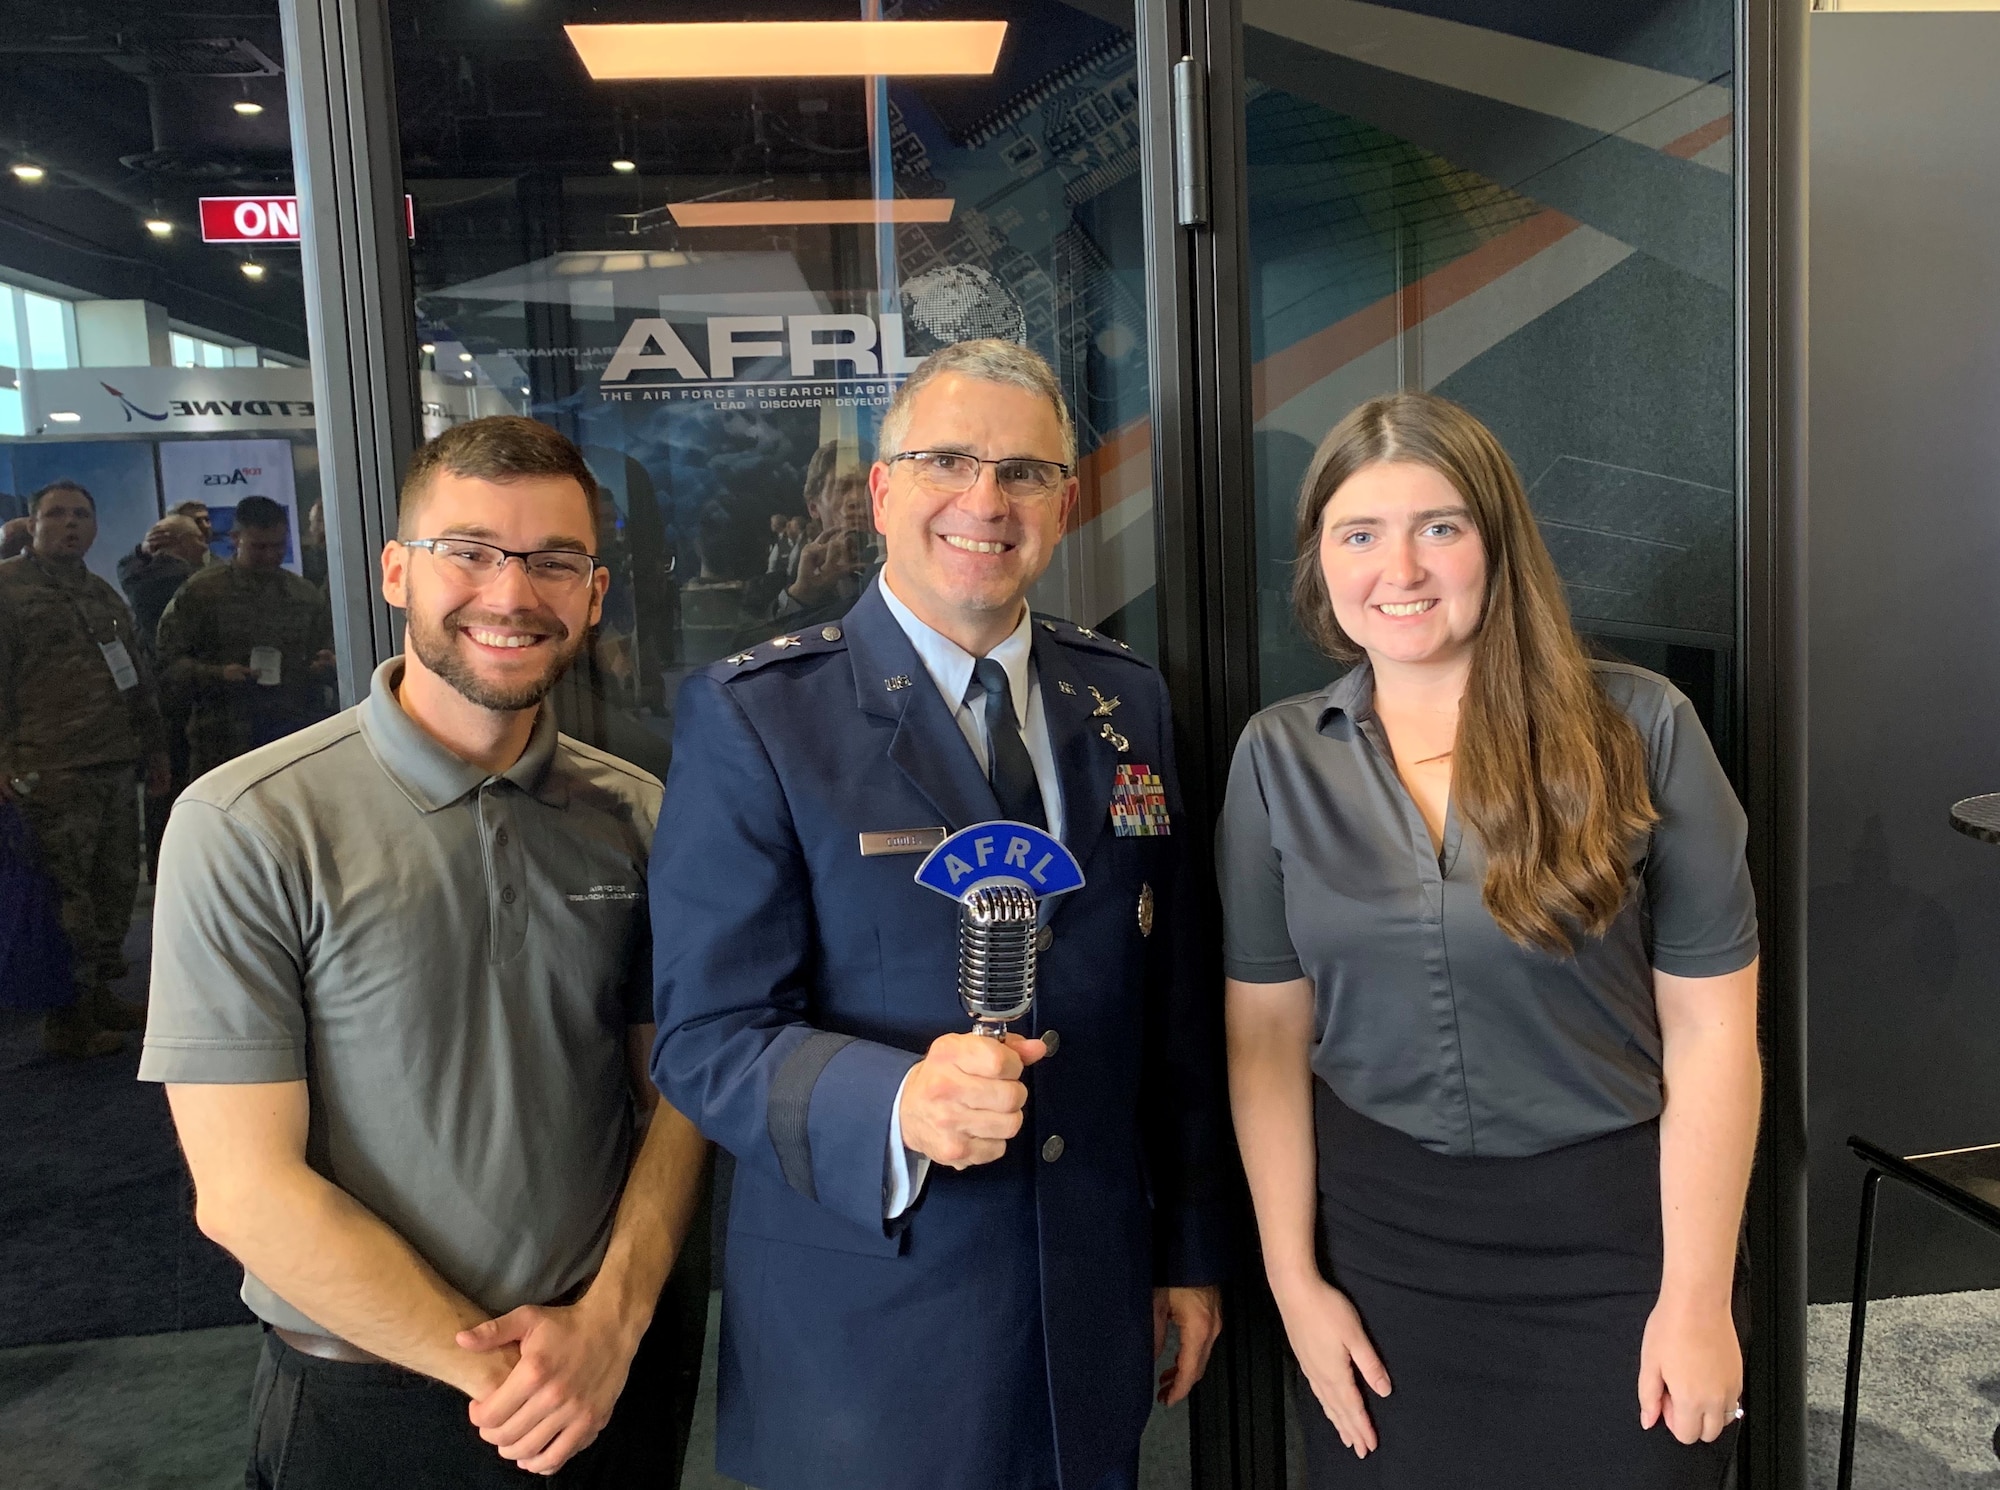 Maj. Gen. William Cooley, commander of the Air Force Research Laboratory, joins AFRL Lab Life podcast co-hosts, Kenneth McNulty and Michele Miller at the Lab Life podcast booth on the floor of the Air Force Association's Air, Space, and Cyber conference exhibit area during the 2019 Air, Space, and Cyber conference. Cooley joined other senior Air Force leaders as guests on the podcast, sharing views on Air Force science and technology growth. (Courtesy photo)